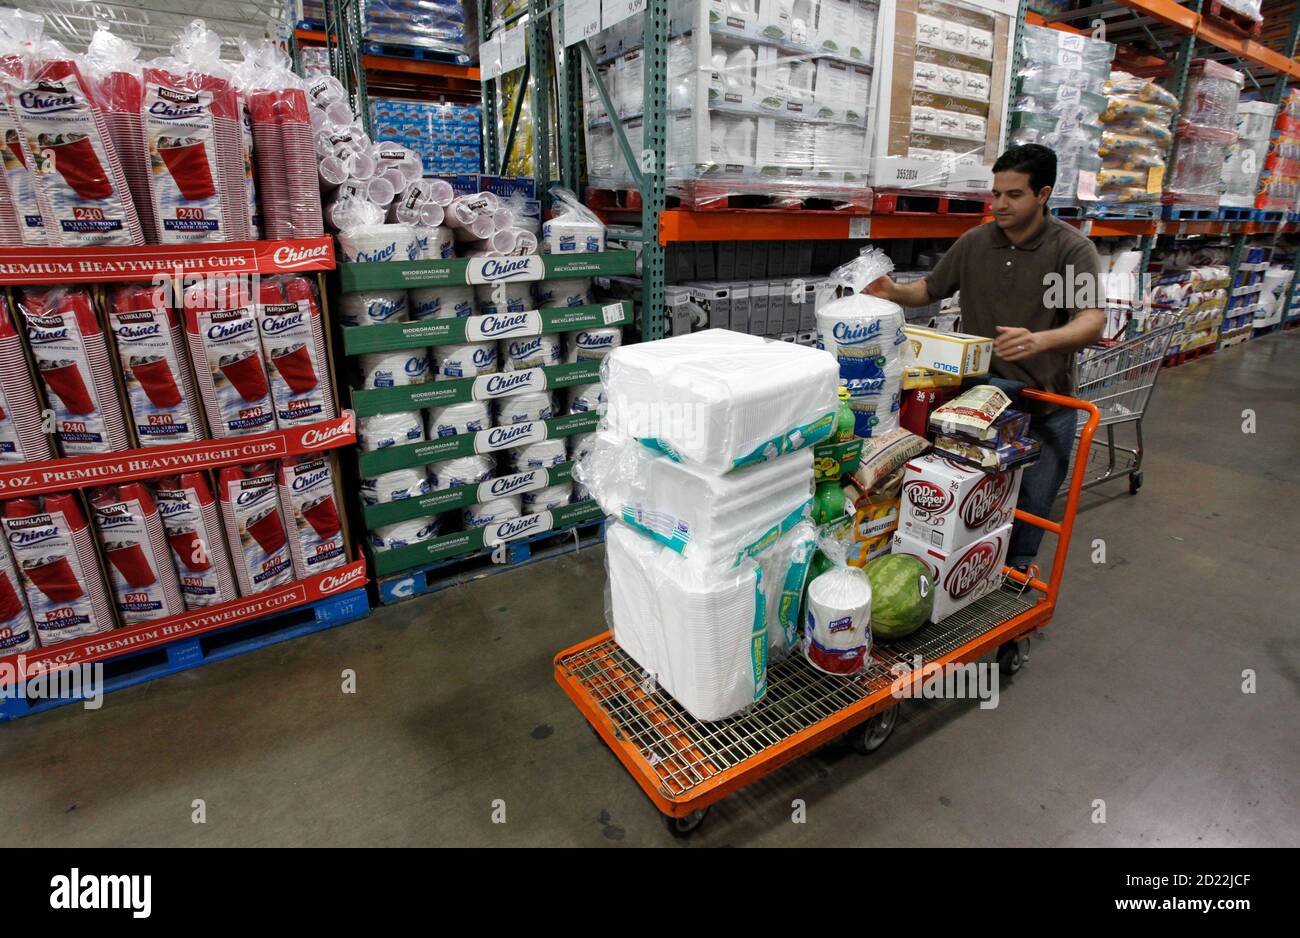 A shopper loads his cart at a Costco Wholesale store in Arlington, Virginia  August 6, 2009. Costco Wholesale Corp reported a bigger-than-expected 7  percent fall in July same-store sales hurt mainly by